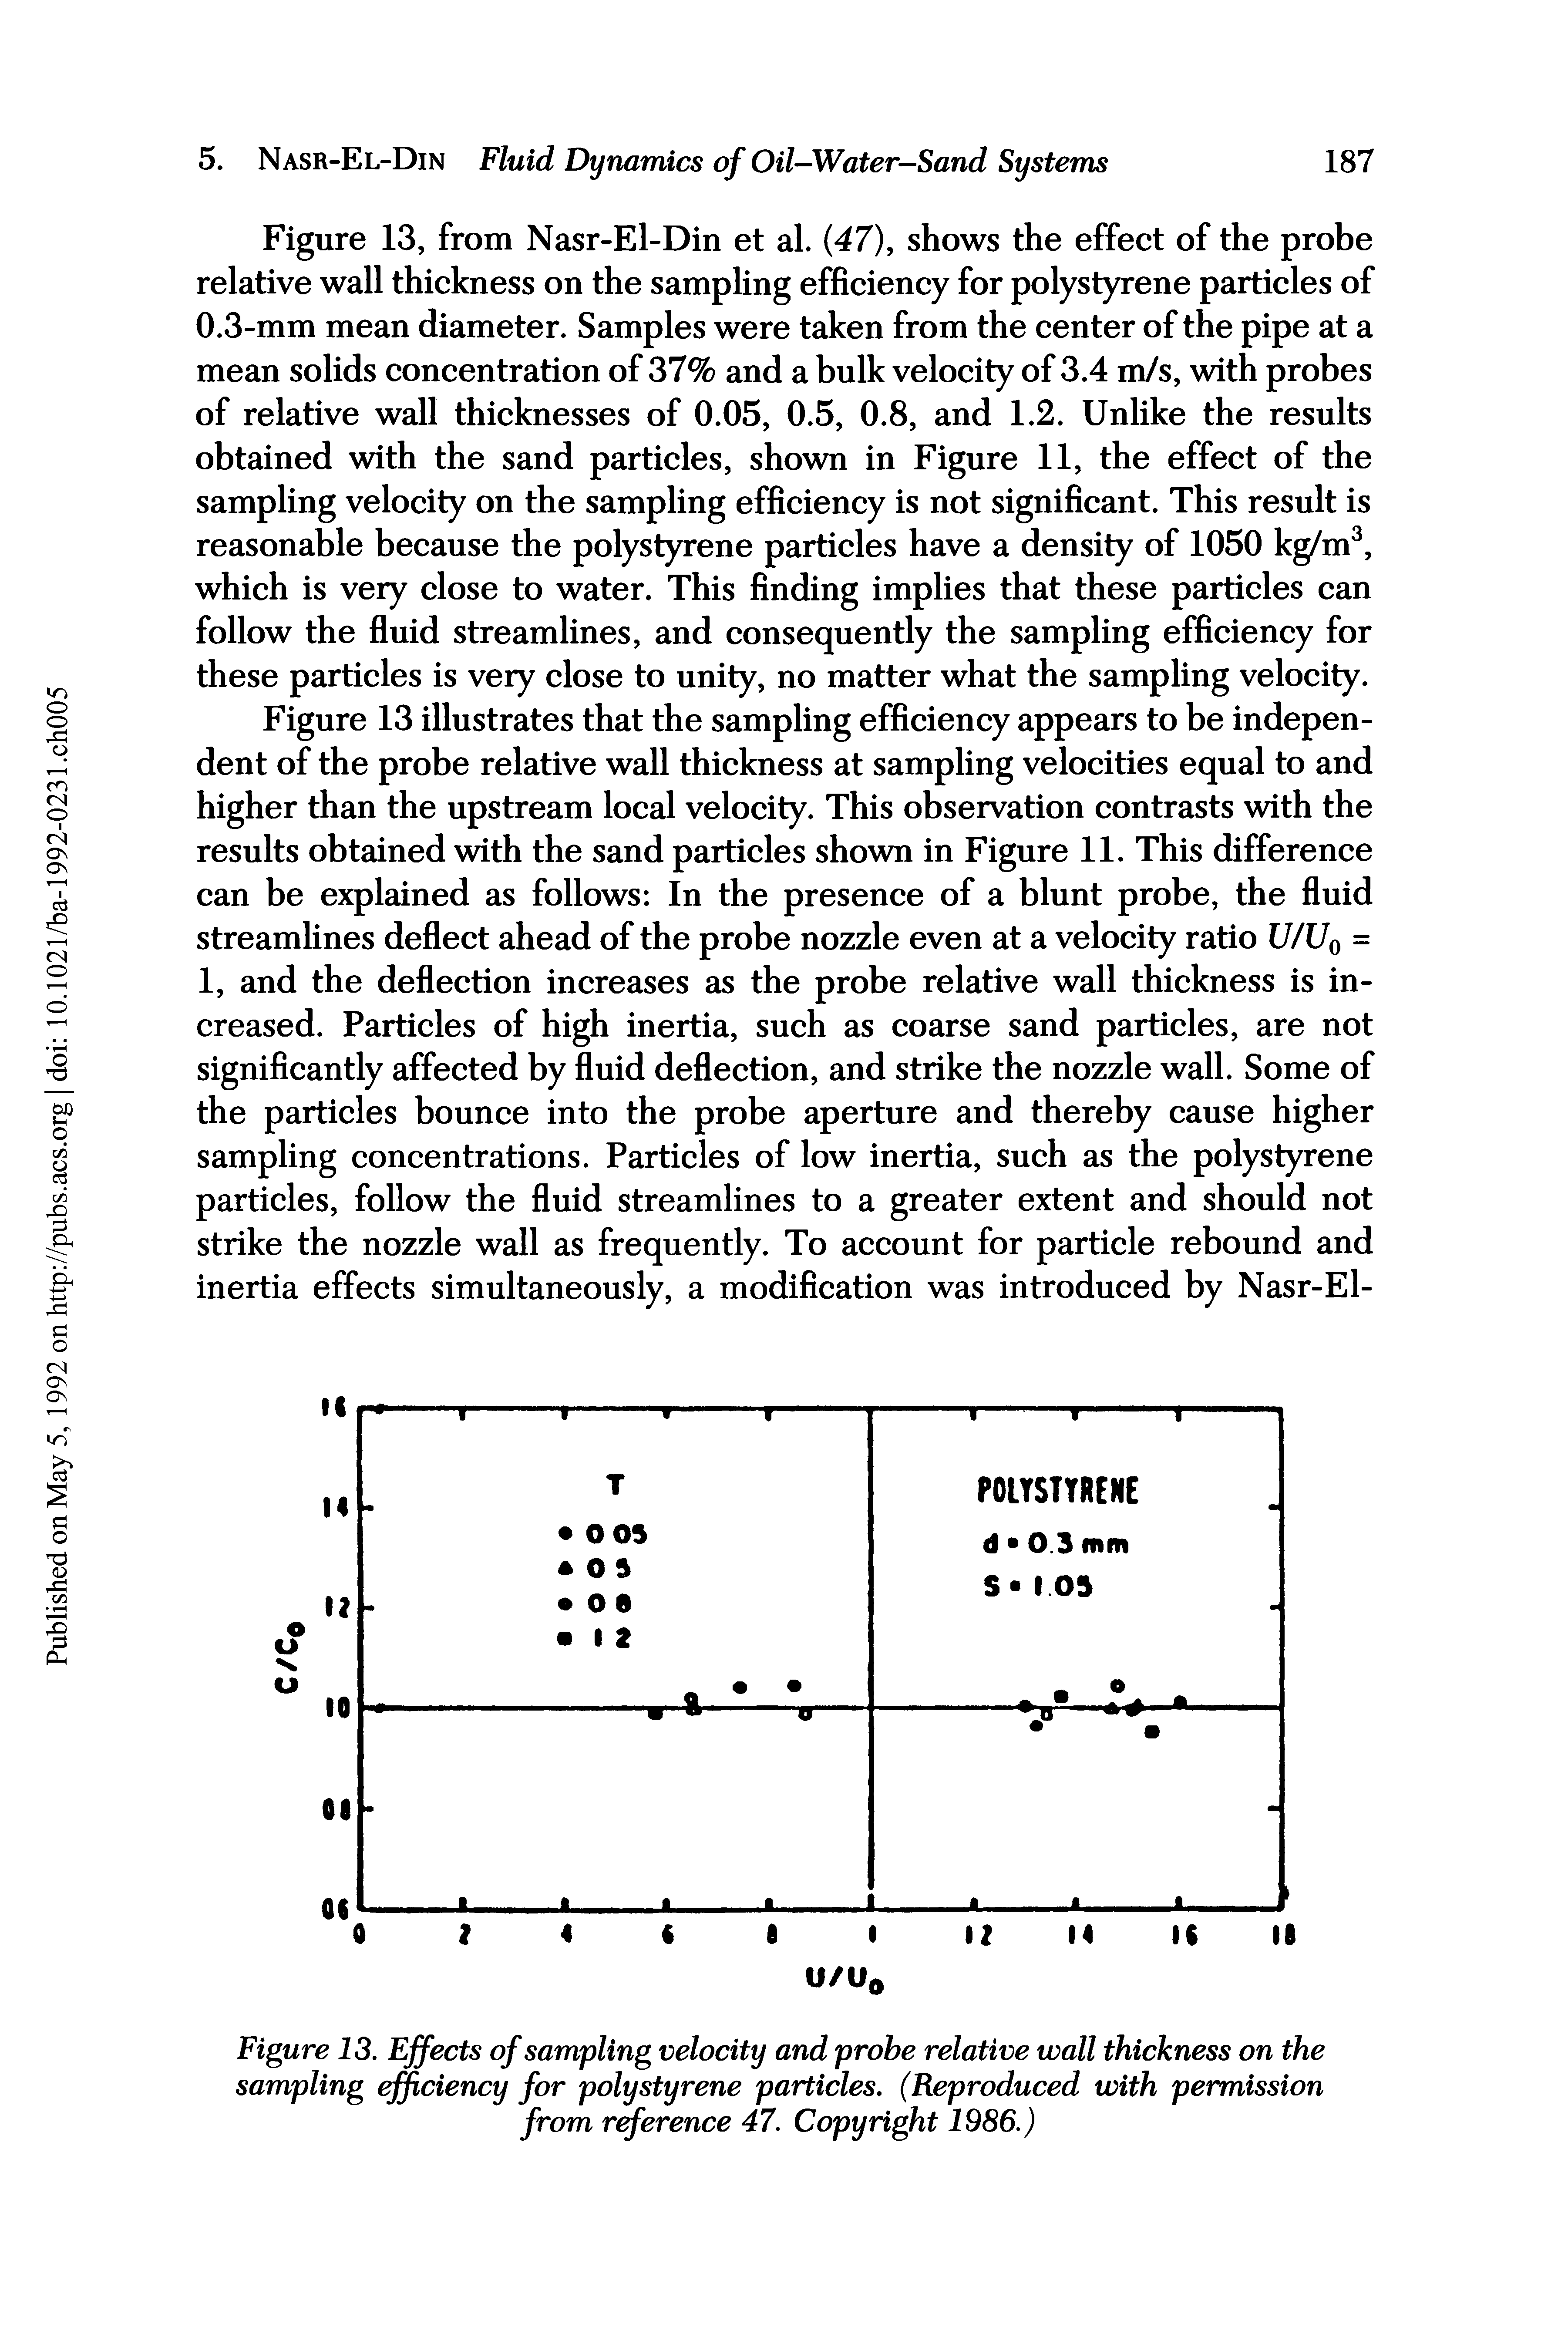 Figure 13 illustrates that the sampling efficiency appears to be independent of the probe relative wall thickness at sampling velocities equal to and higher than the upstream local velocity. This observation contrasts with the results obtained with the sand particles shown in Figure 11. This difference can be explained as follows In the presence of a blunt probe, the fluid streamlines deflect ahead of the probe nozzle even at a velocity ratio U/Uq =...